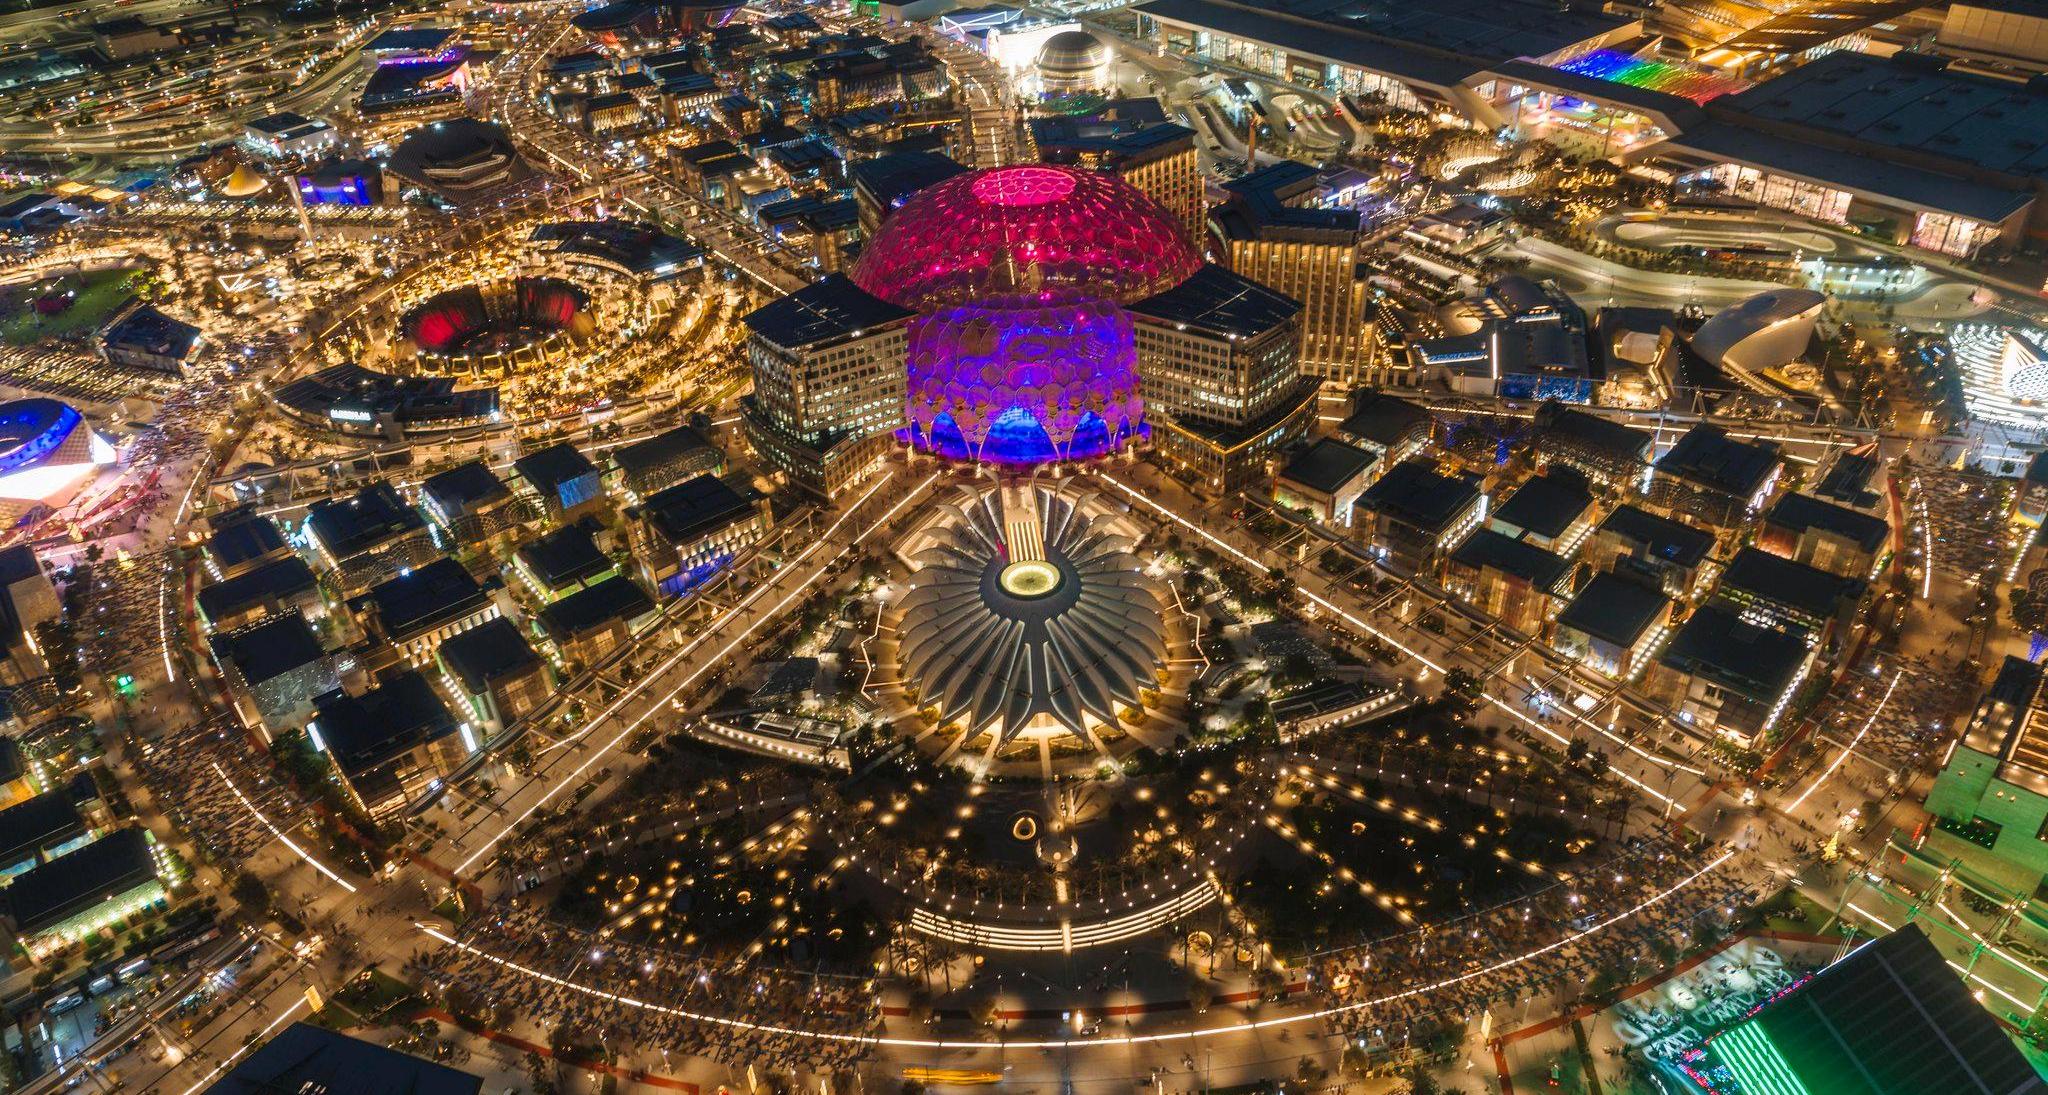 Expo 2020 Dubai approaches 11mln visits, driven by musical events